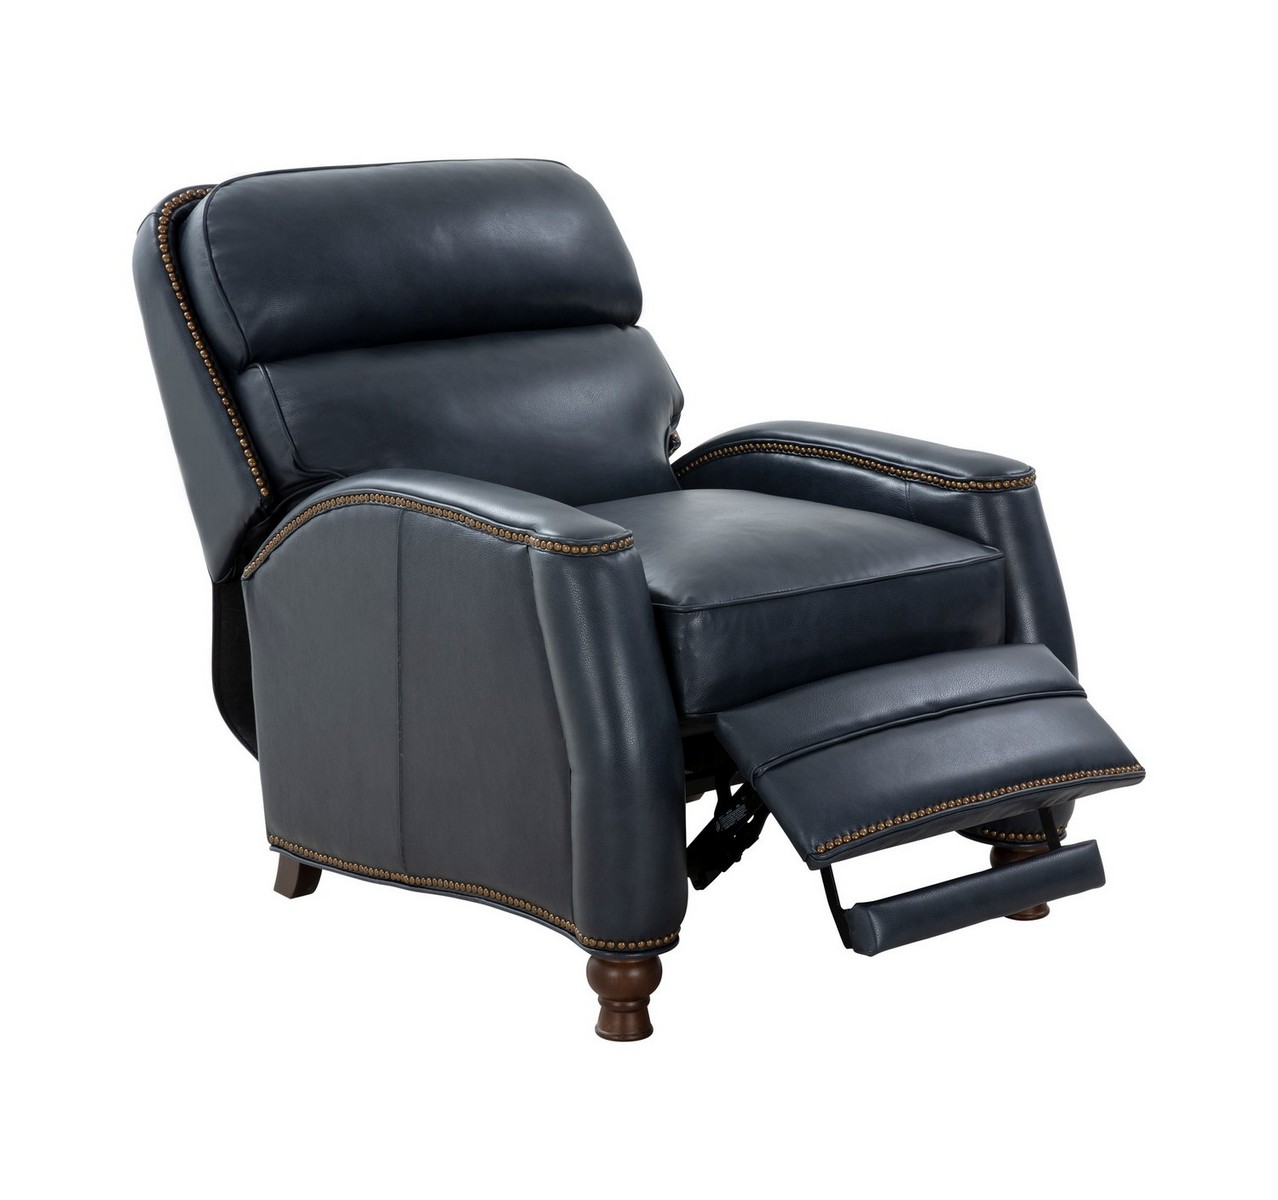 Barcalounger Townsend Recliner Chair - Barone Navy Blue/All Leather